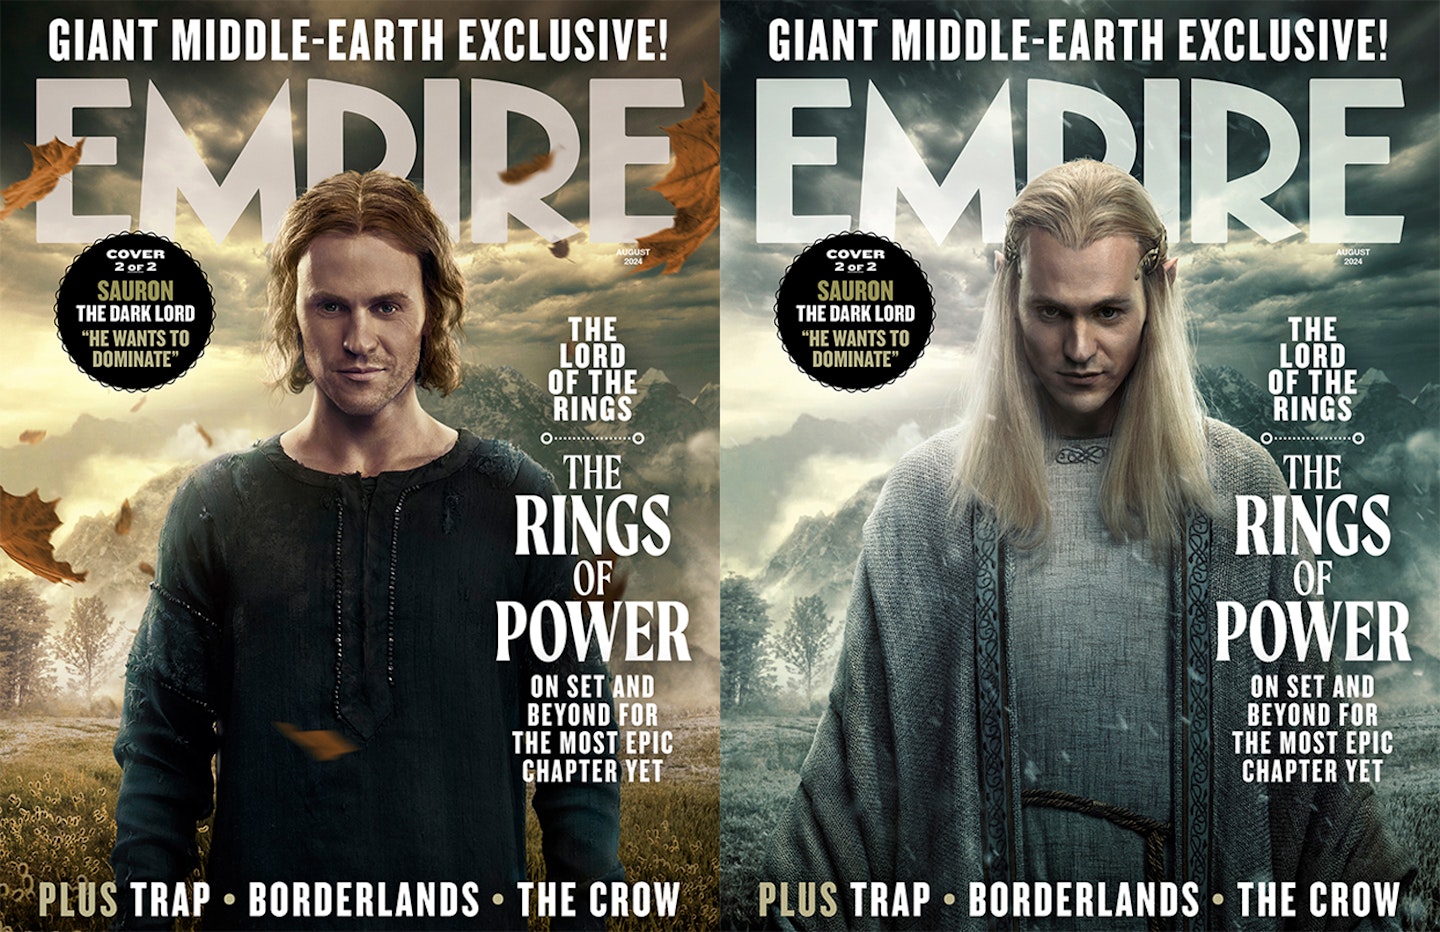 The Lord Of The Rings: The Rings Of Power Season 2 – Empire Sauron covers